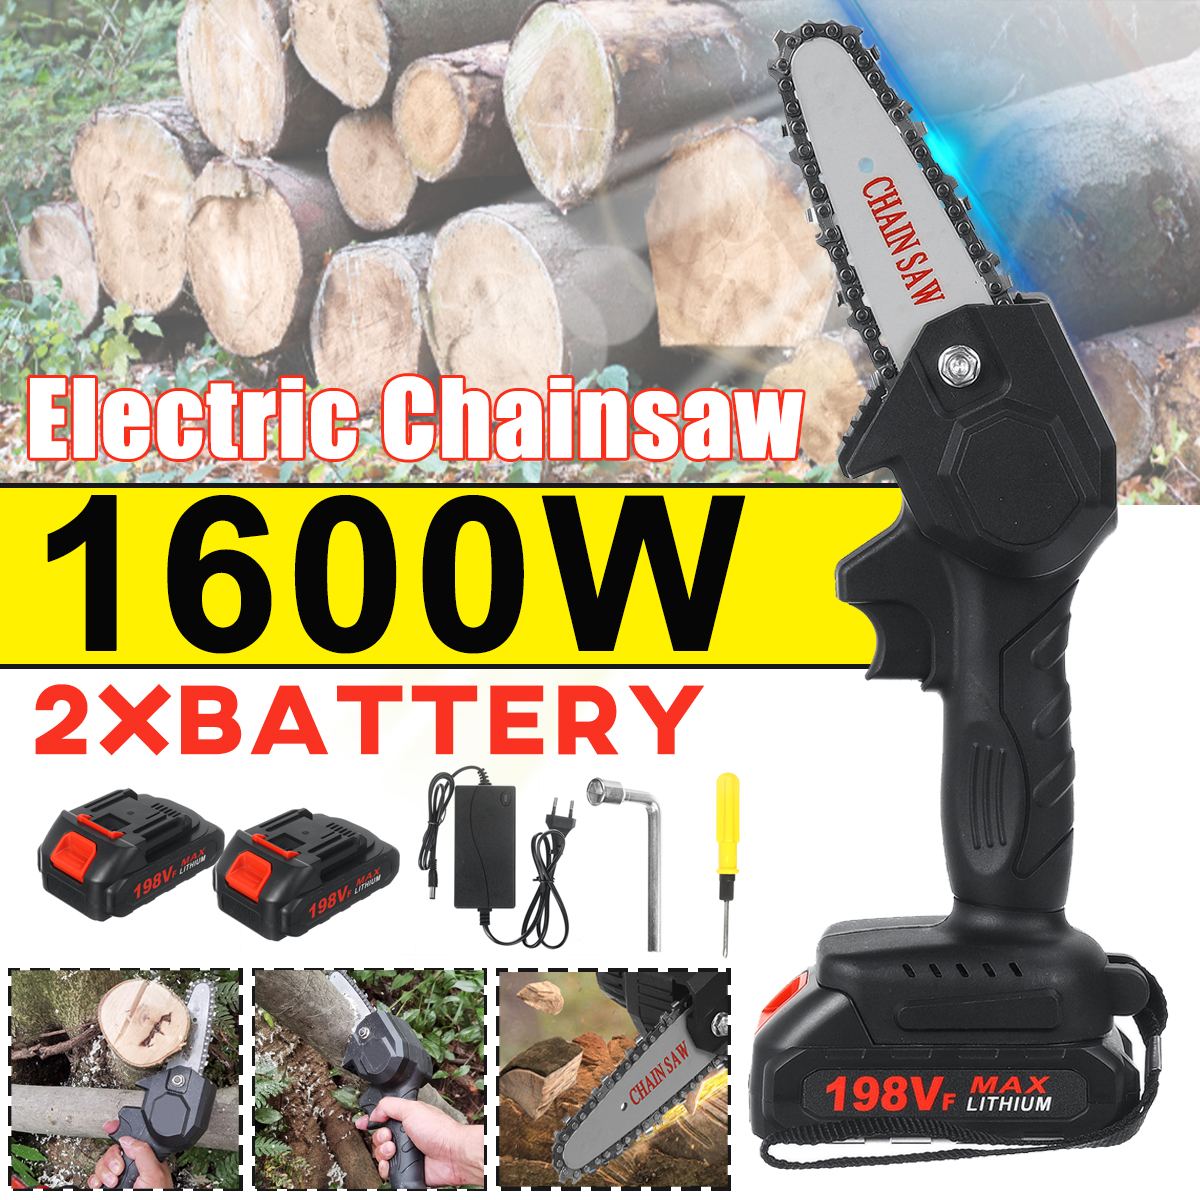 21V-4-Inch-600W-Electric-Chain-Saw-Handheld-Cordless-Rechargeable-Portable-Woodworking-Saw-W-012pcs--1807522-1